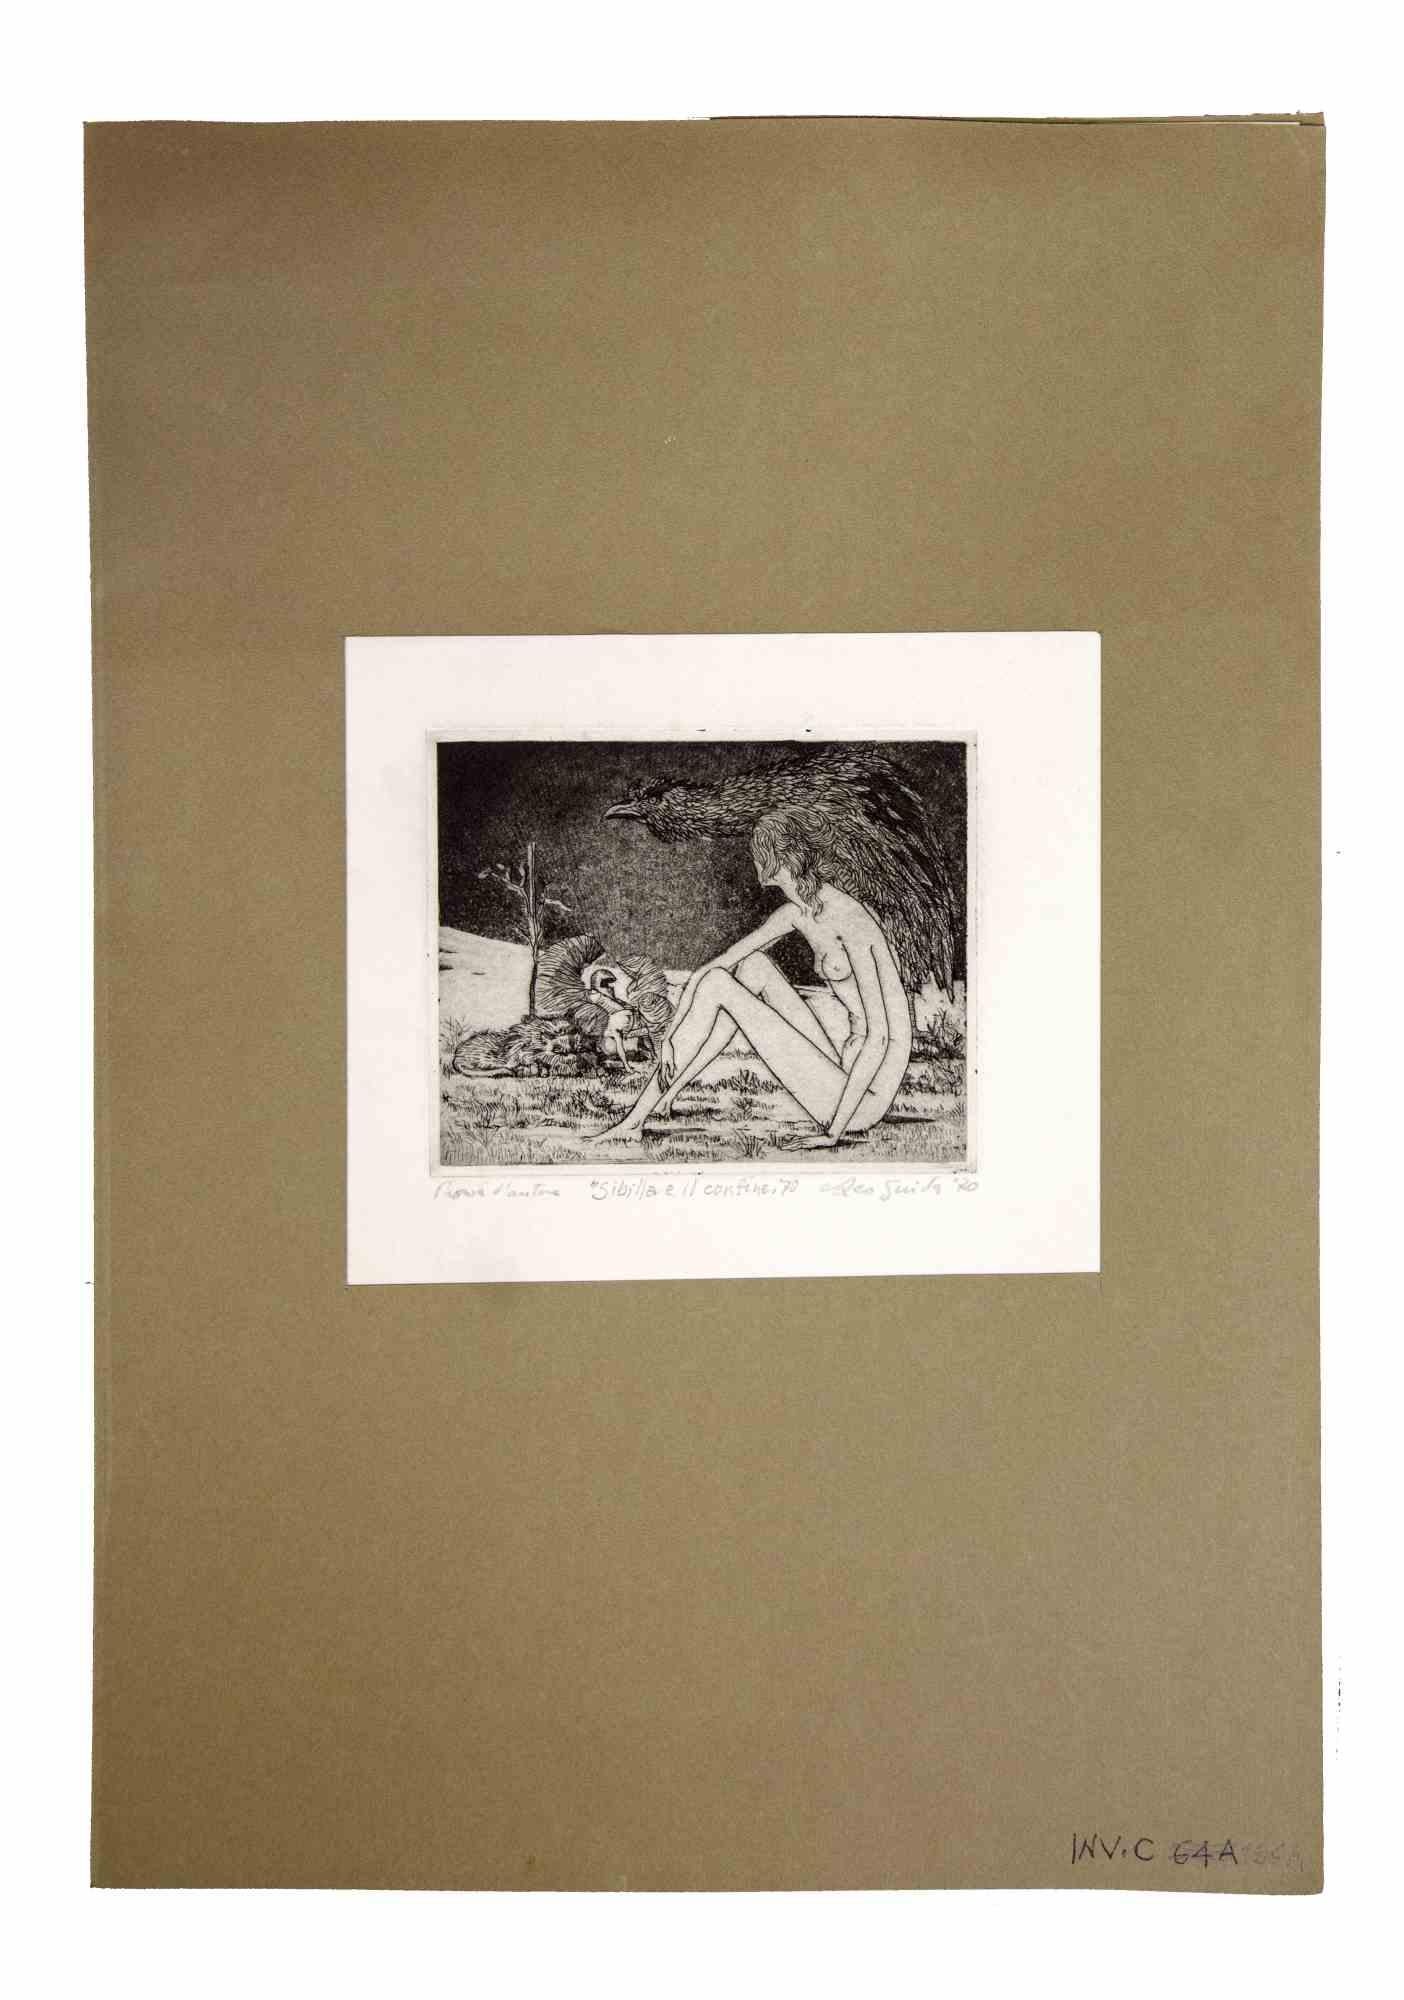 Sibyl and the Border - Original Etching by Leo Guida - 1970 